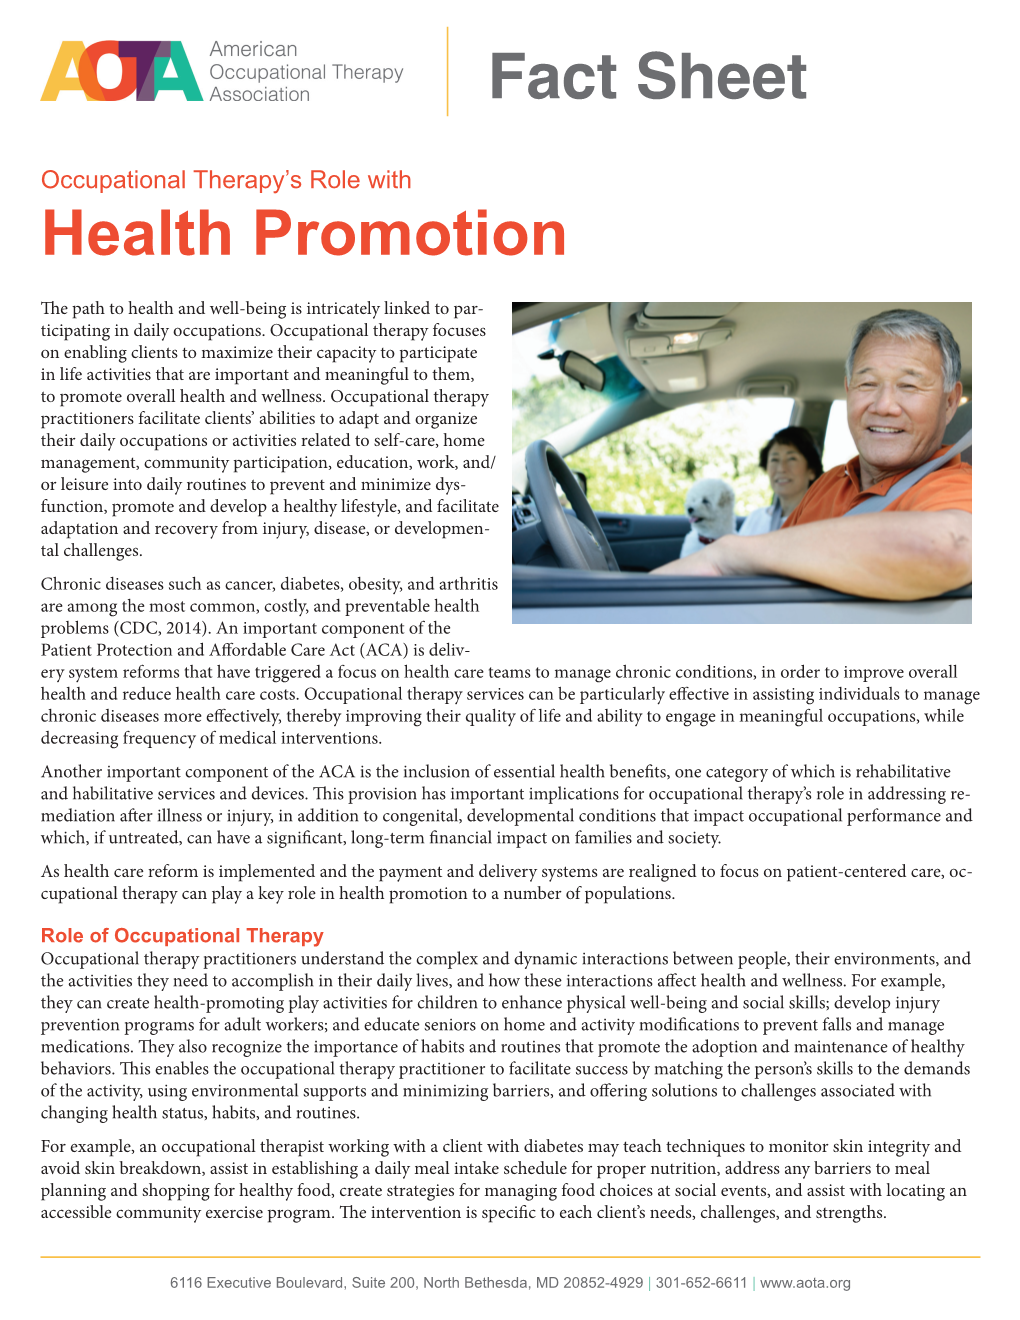 Occupational Therapy's Role in Health Promotion